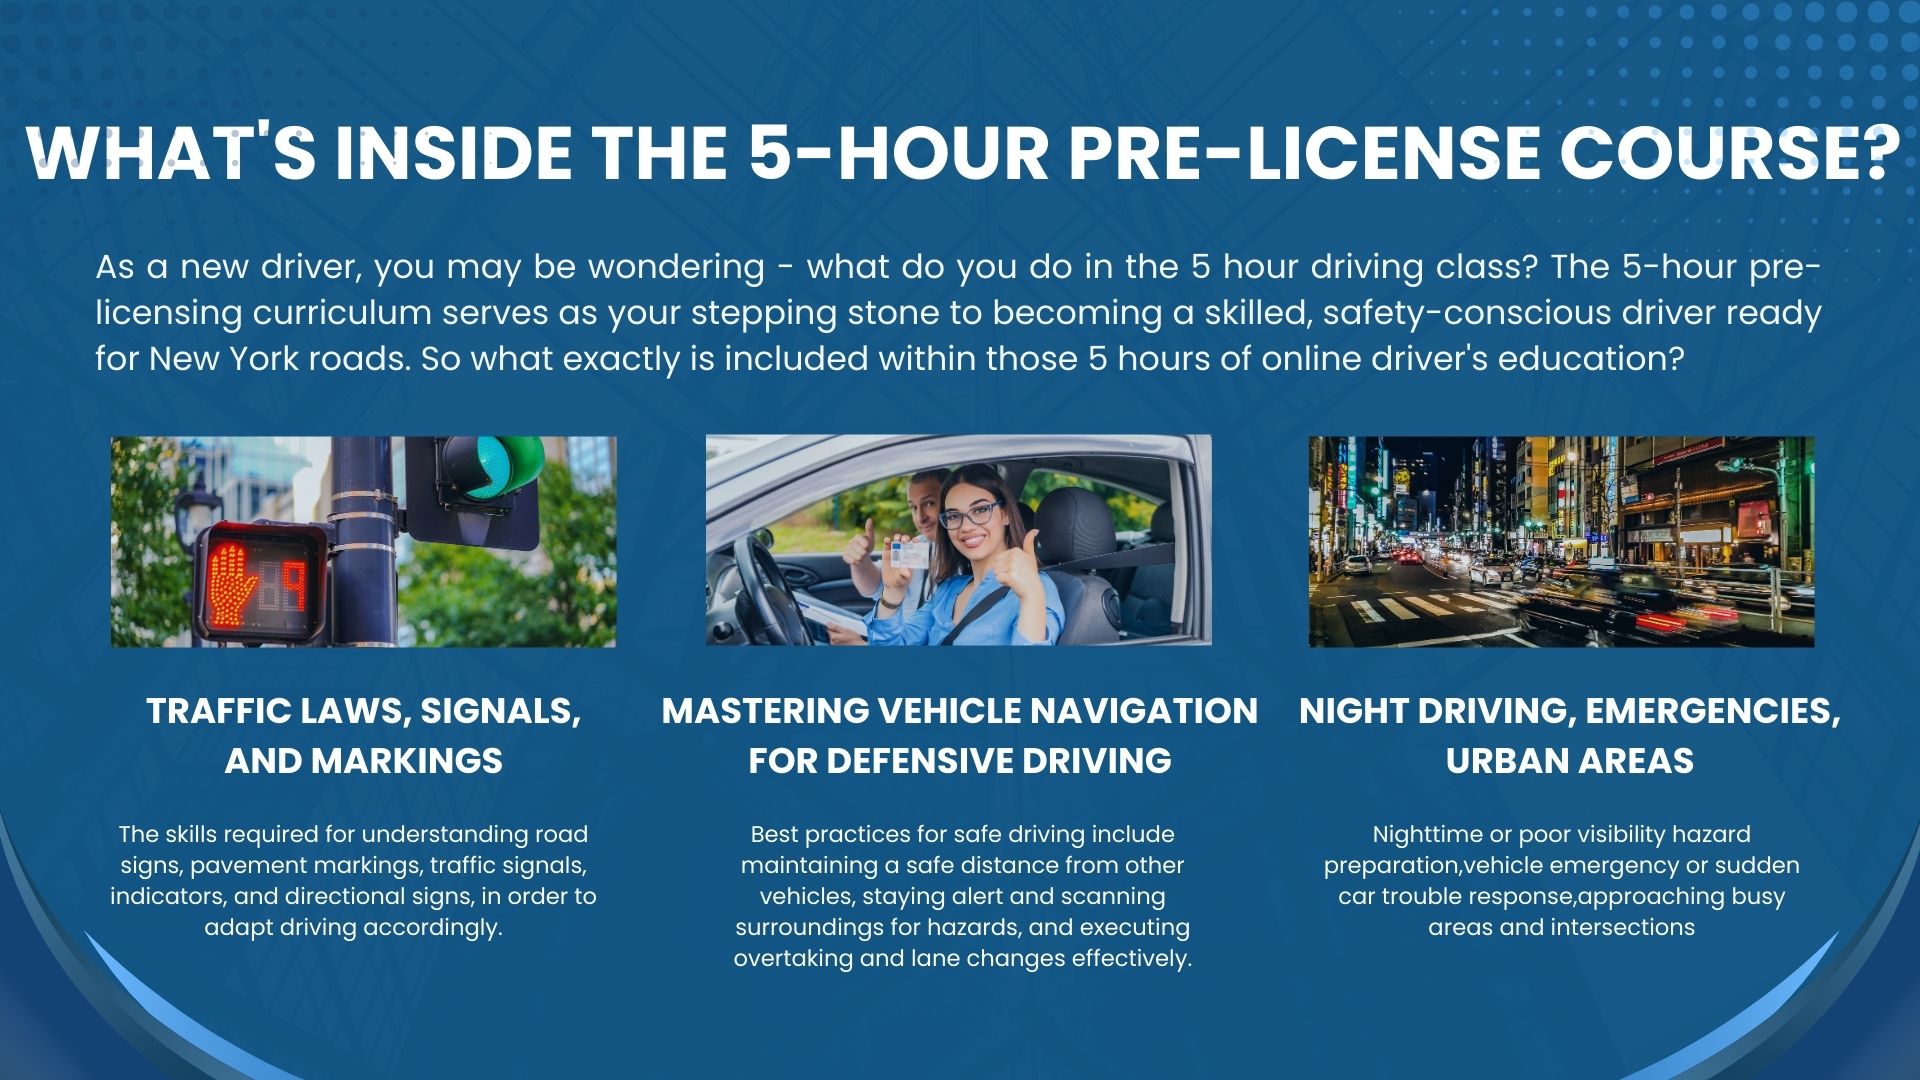 What's Inside the 5-Hour Pre-License Course